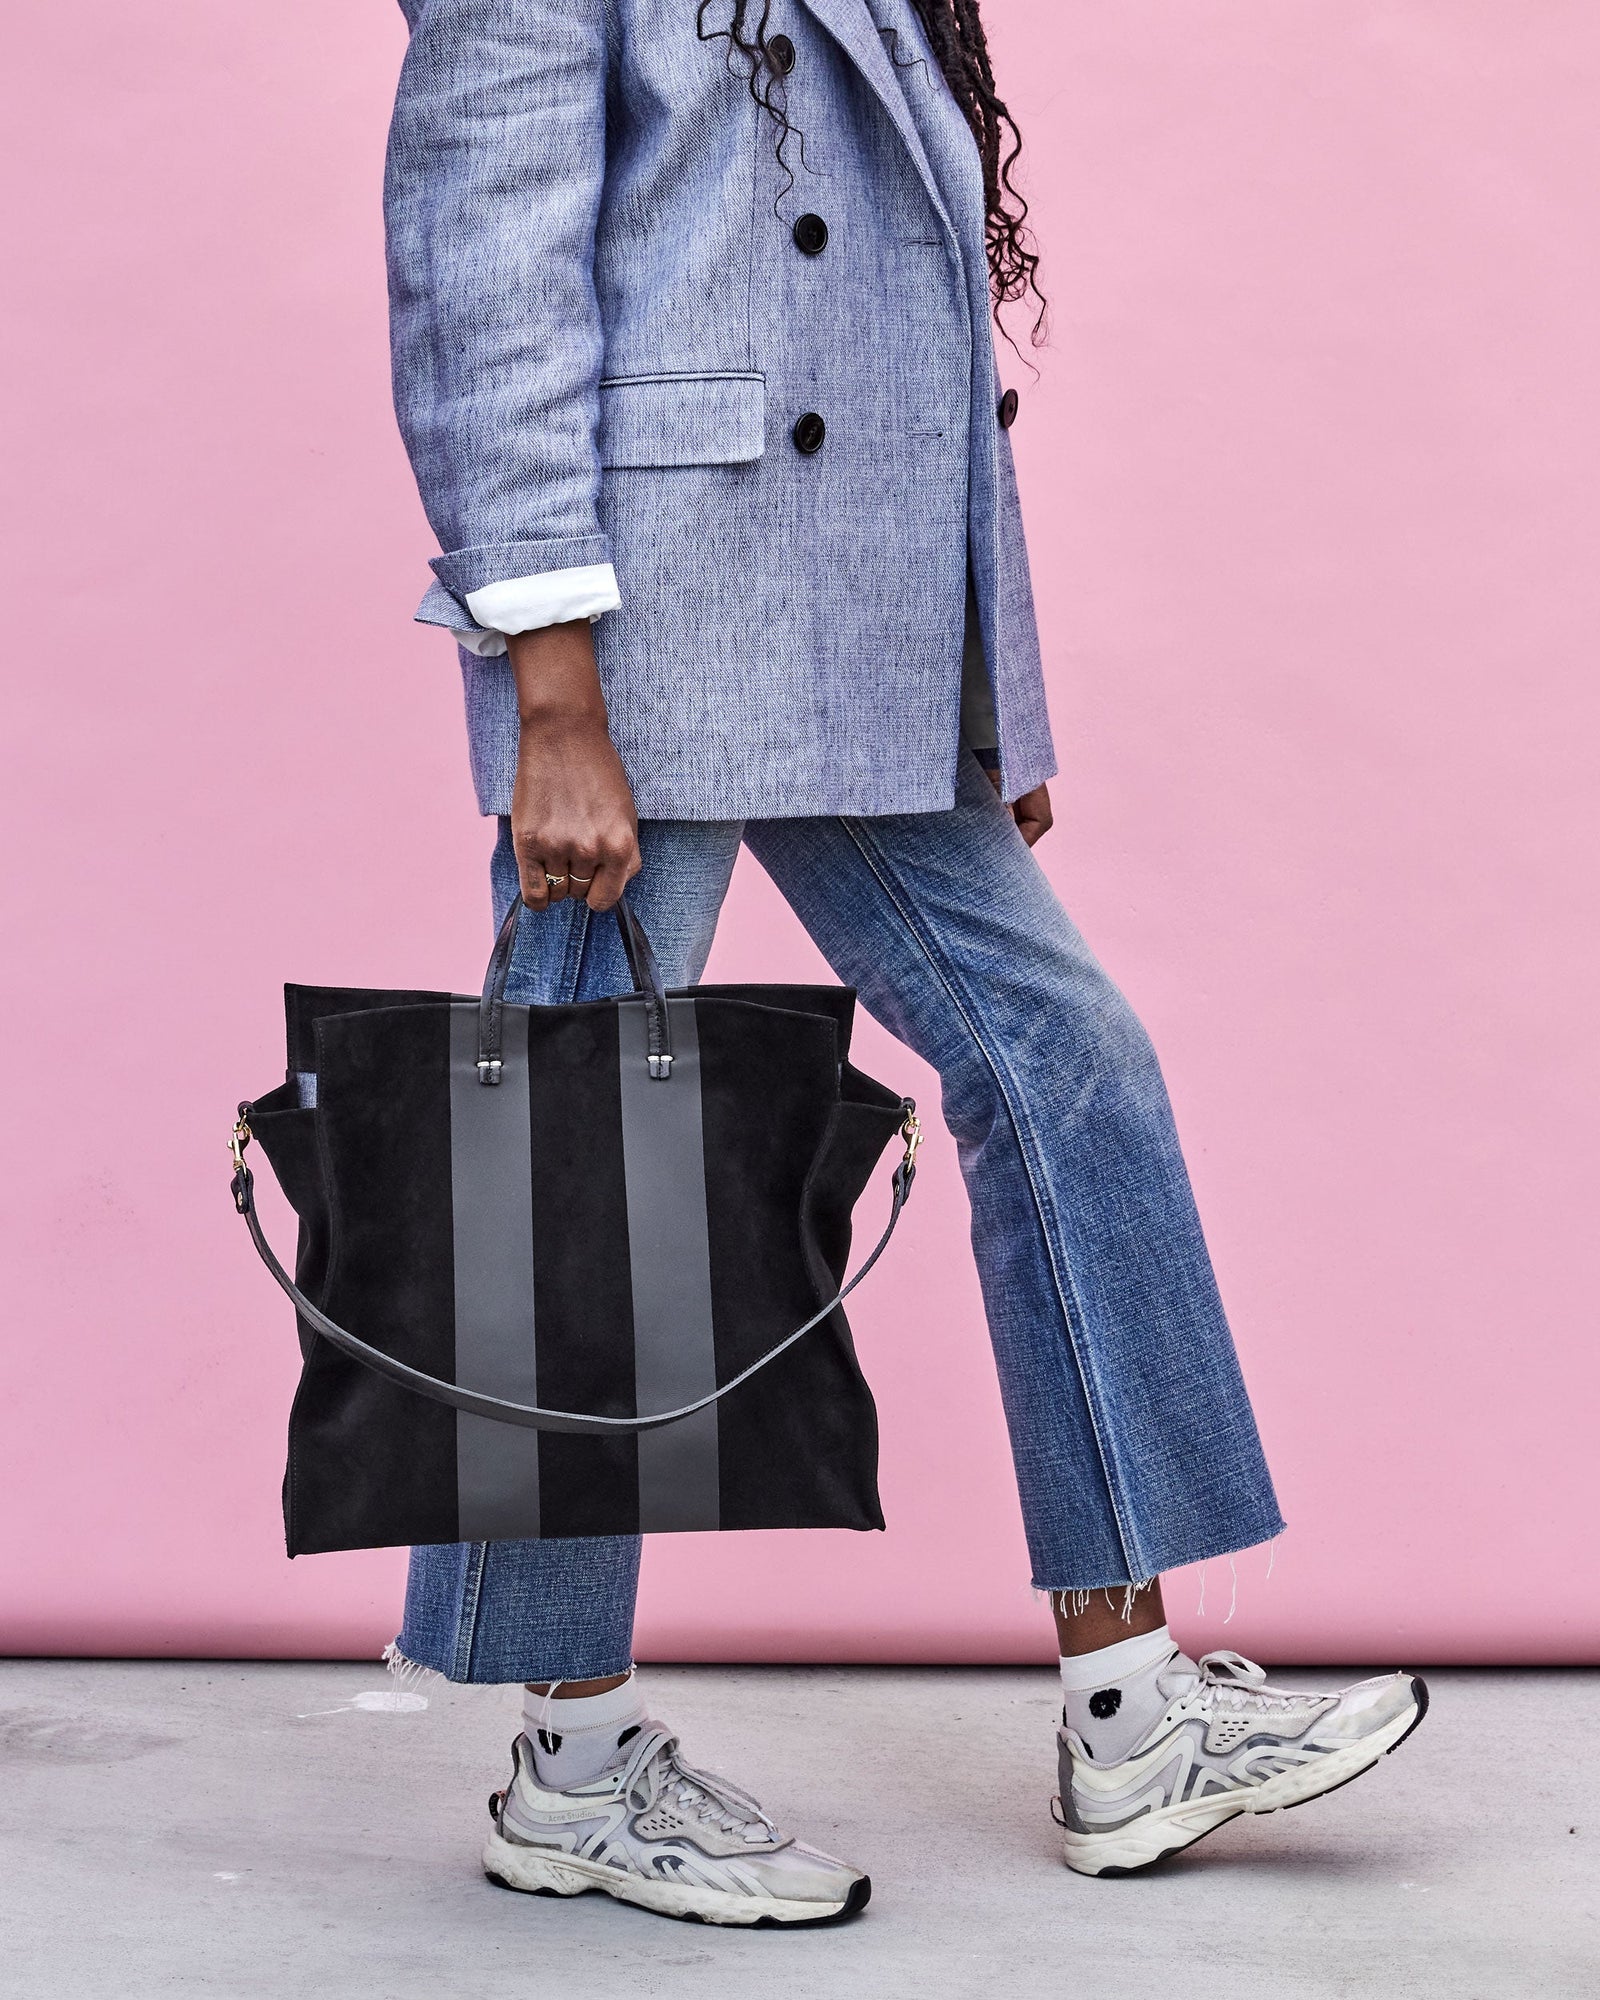 Mecca Holding the  Black Suede with Matte Black Racing Stripes Simple Tote By the Top Handle